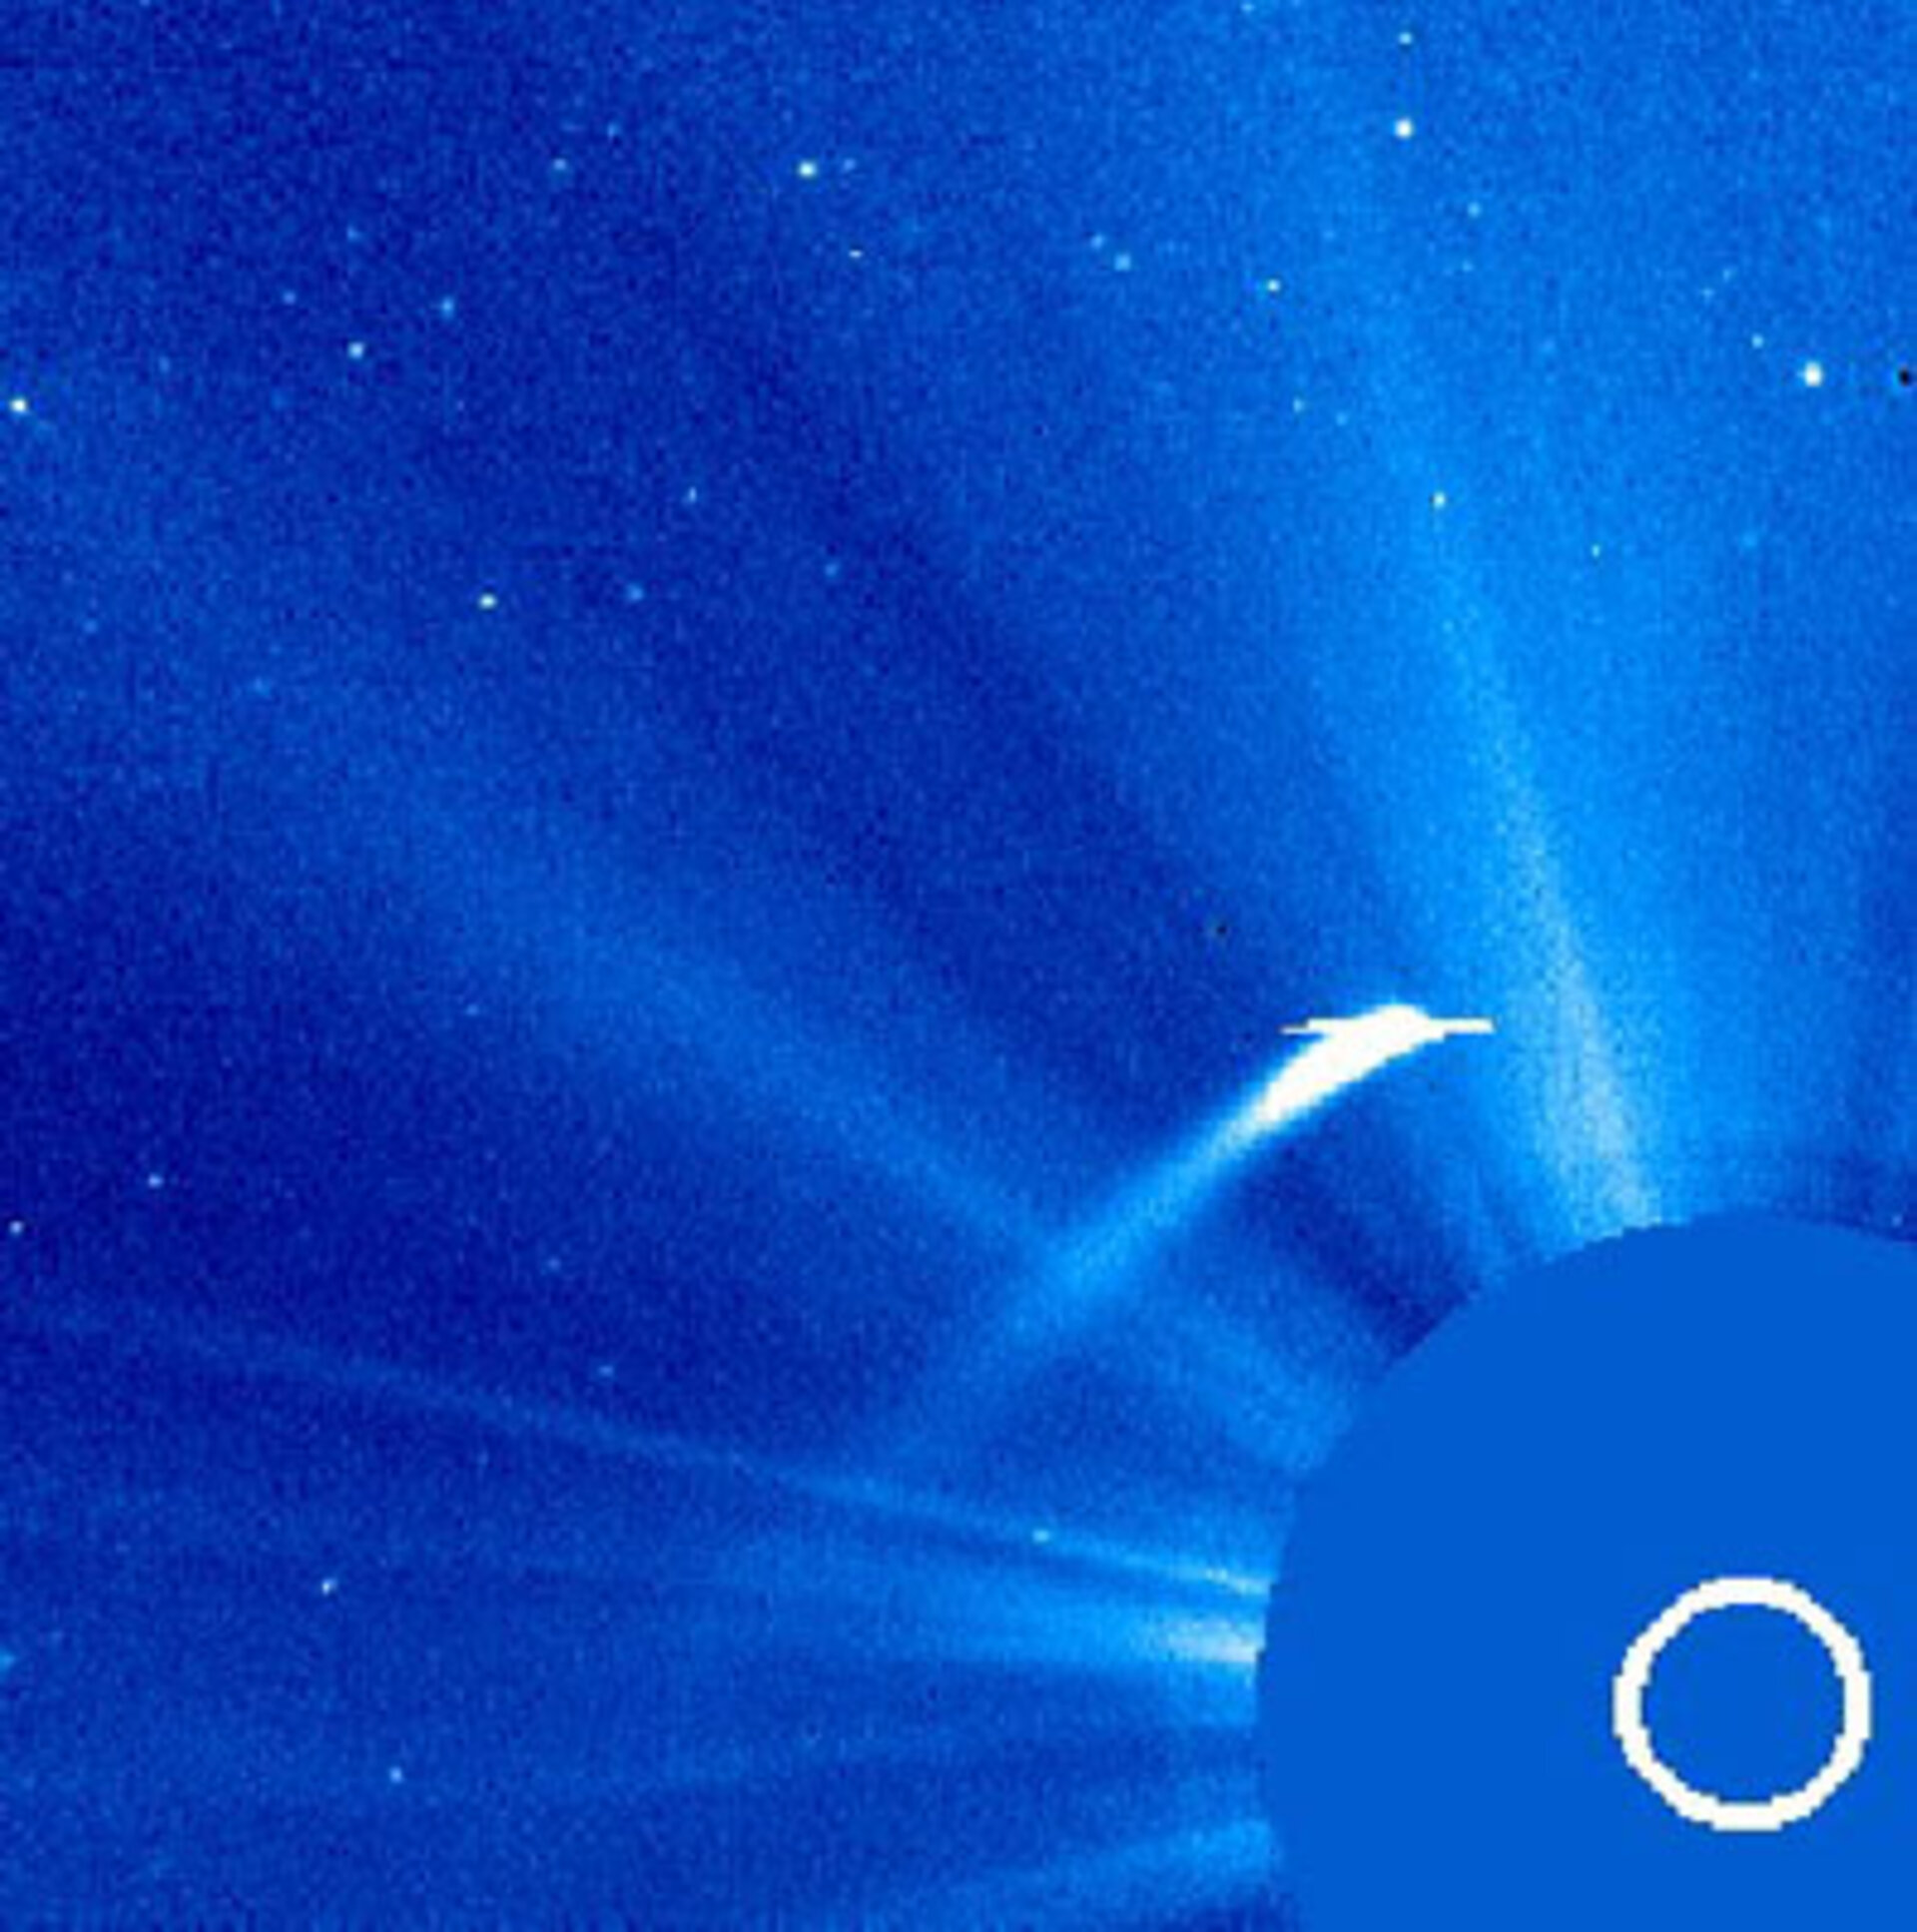 Comet Machholz 1 seen close to the Sun by SOHO on 8 January 2002